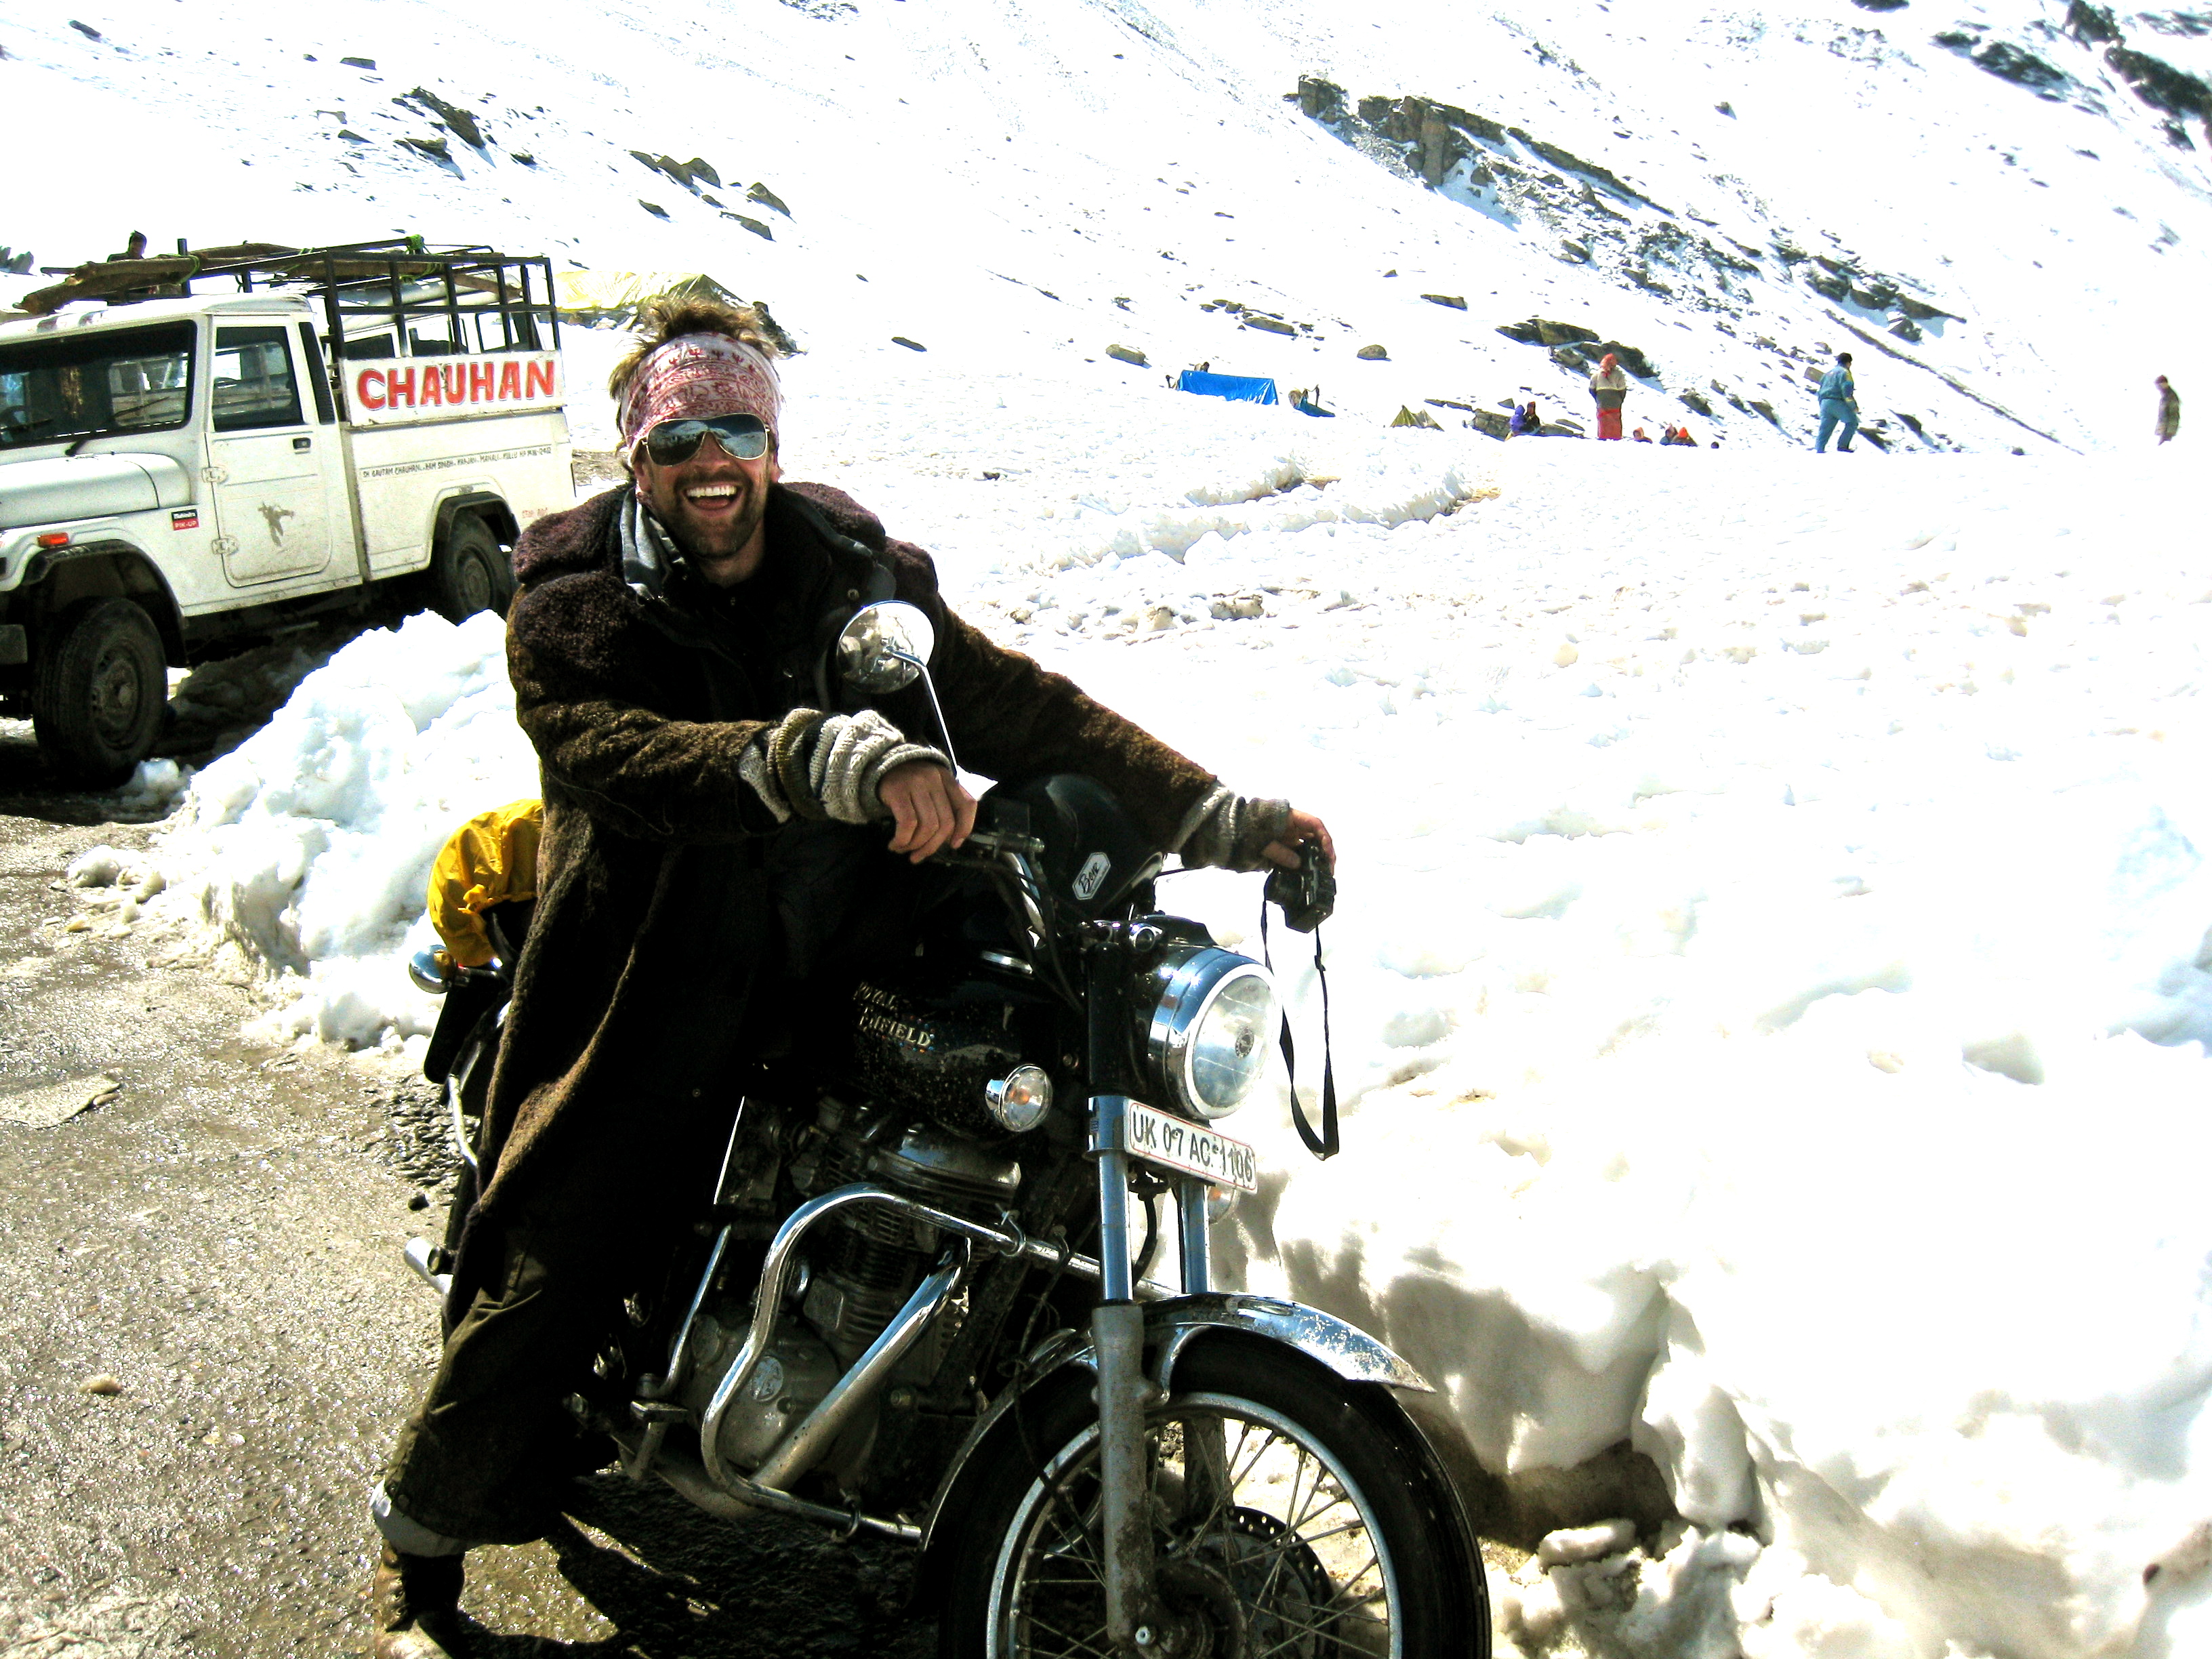 top of the world Himalayas India, THE HIGHEST PASS.. Never the same